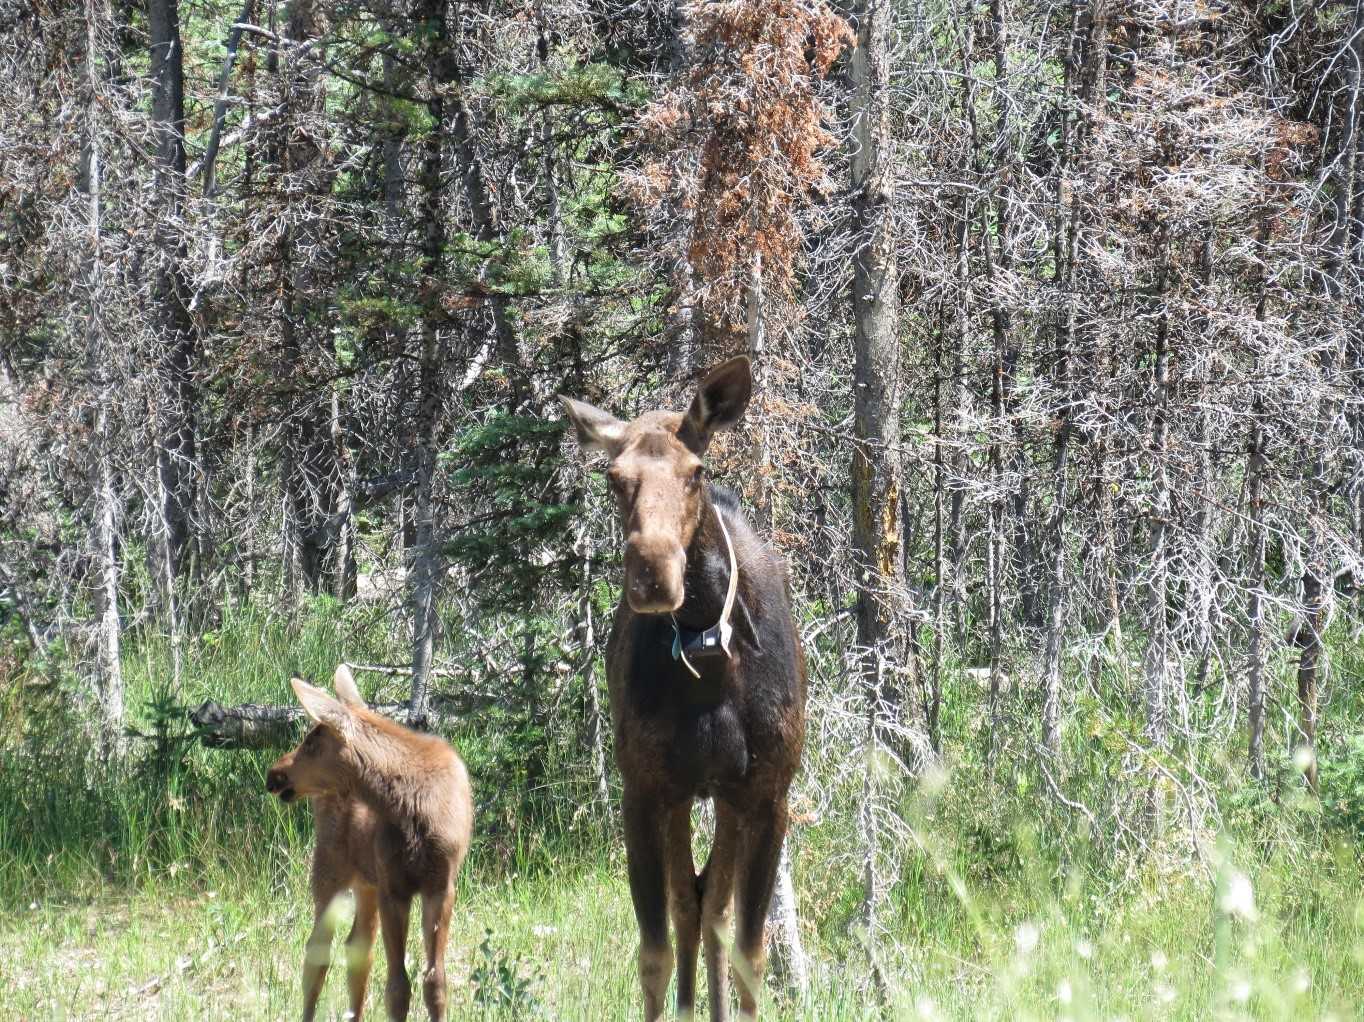 Collared moose with calf